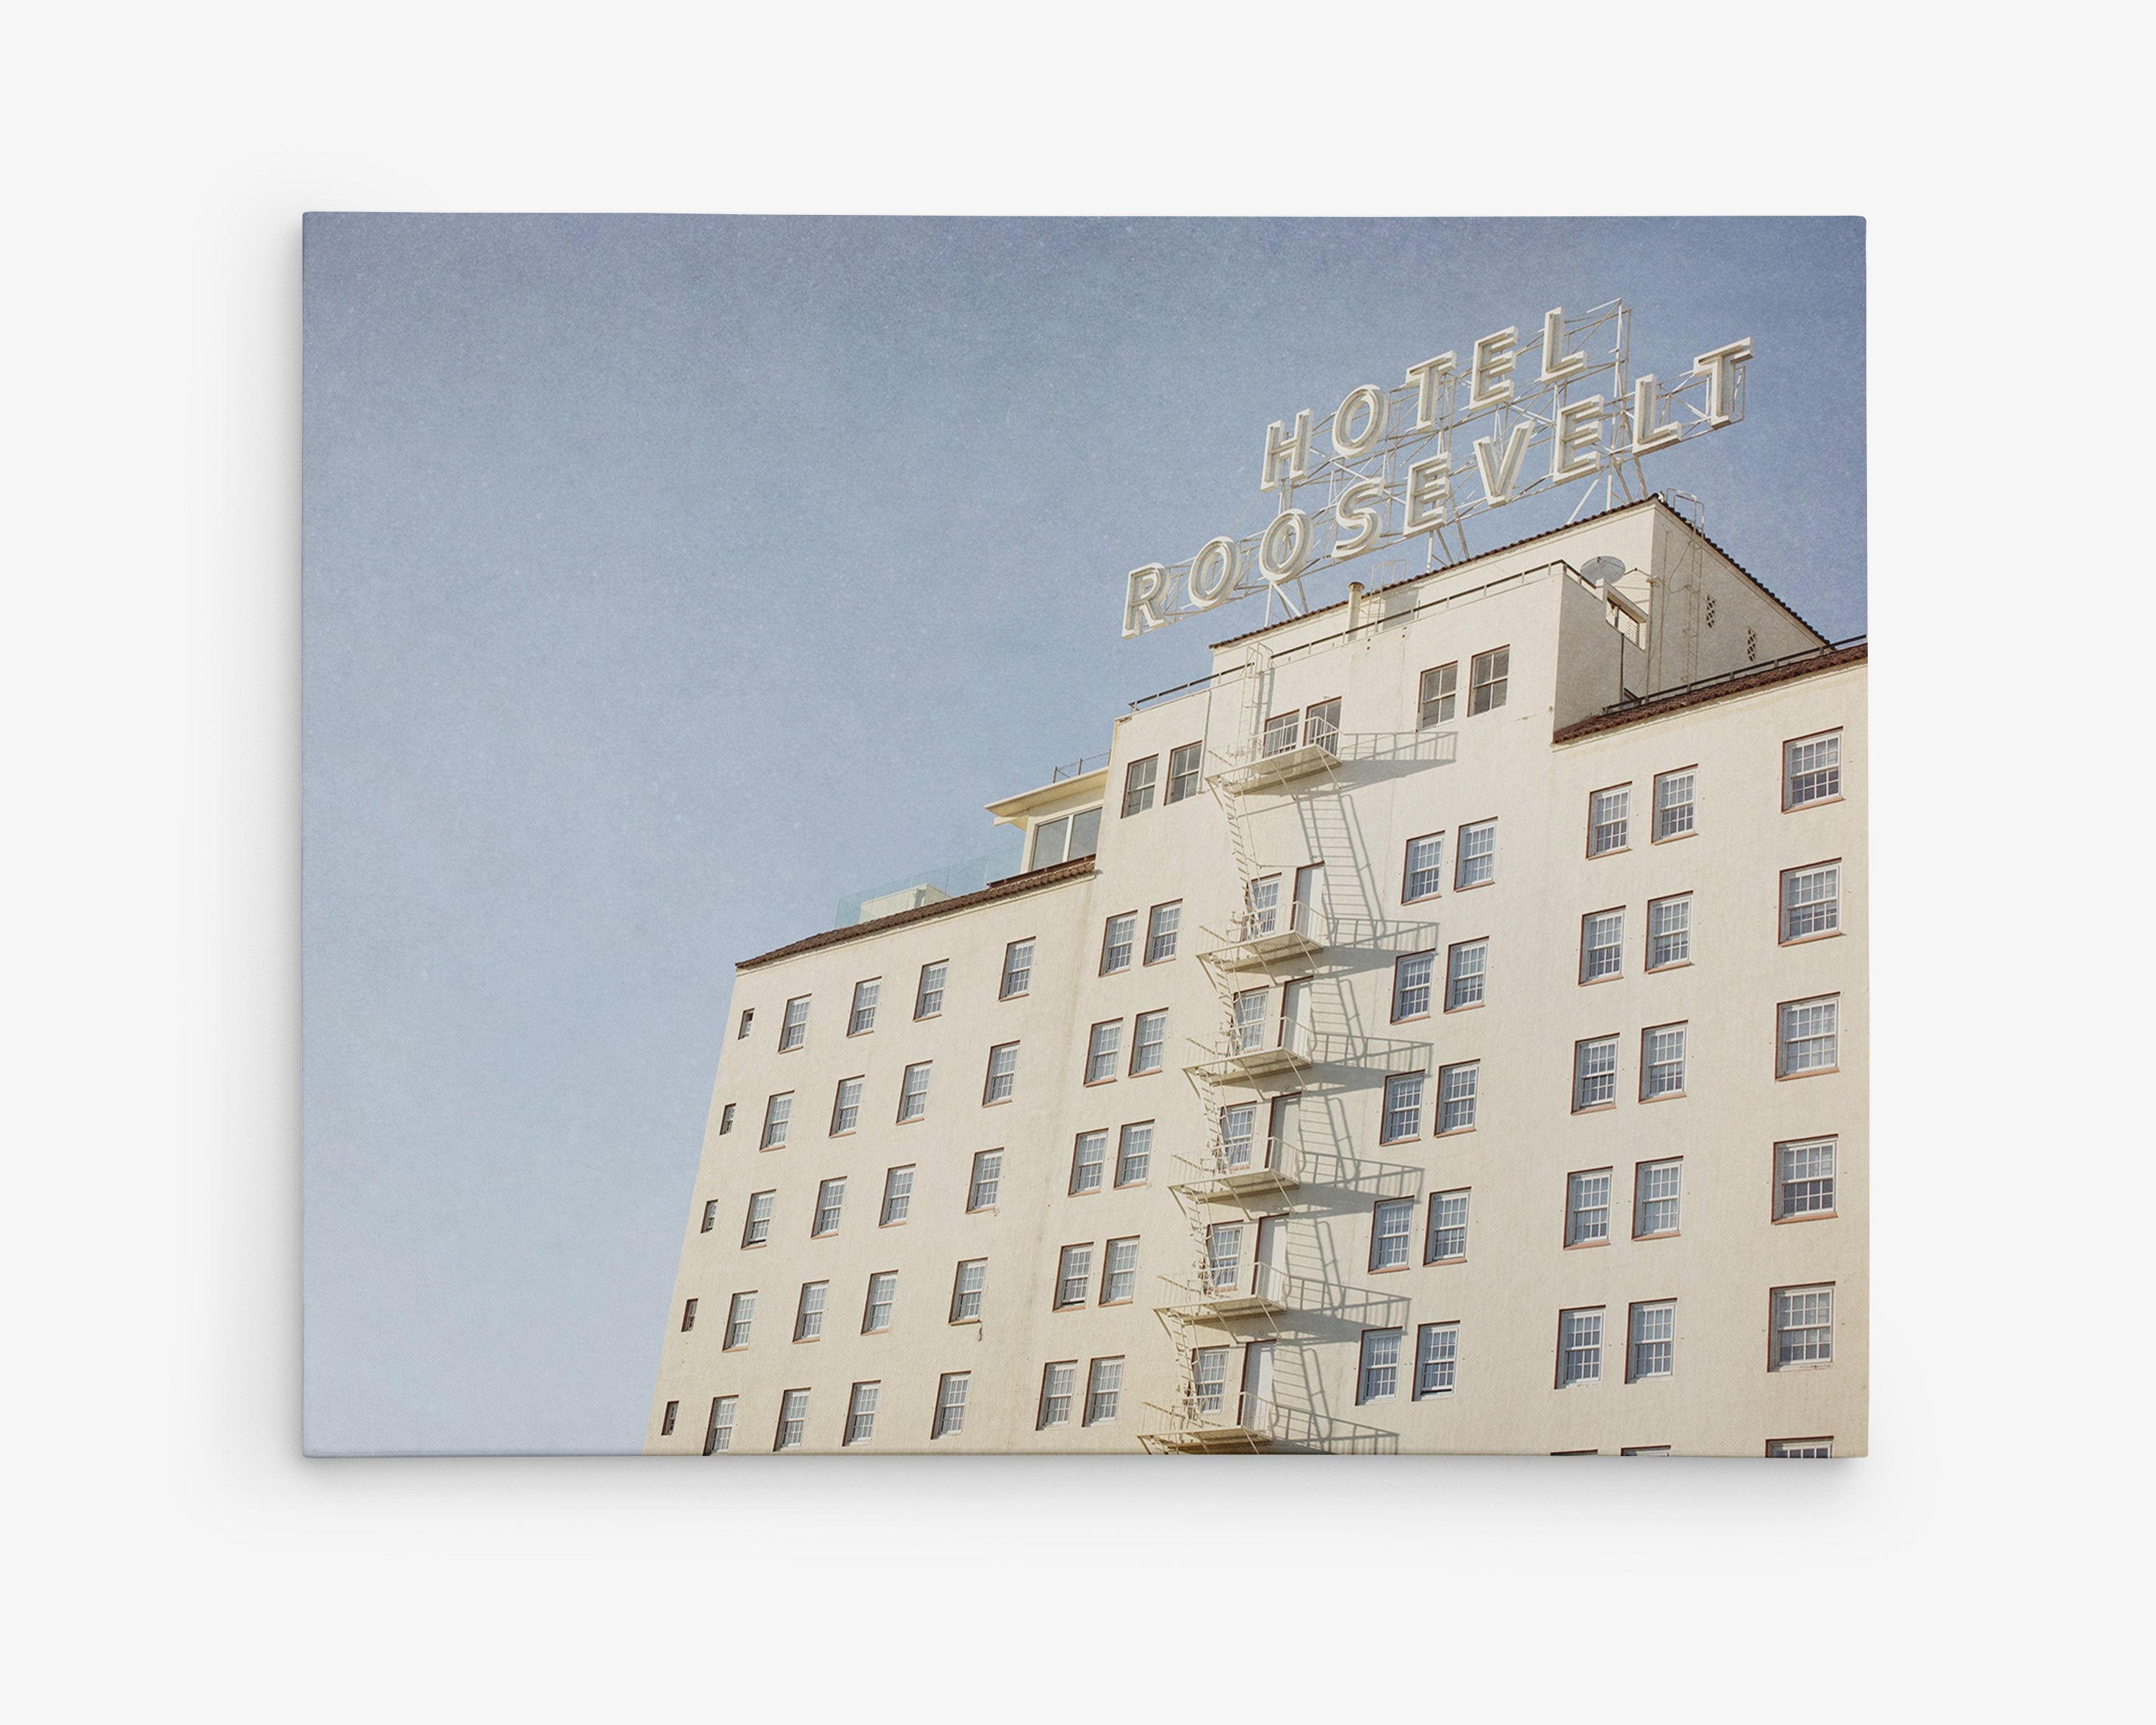 A photograph of the Offley Green Retro Hollywood Canvas Wall Art, &#39;Night in Tinseltown&#39; under a clear sky, showing its white facade and a prominent neon sign on top, with an exterior fire escape on the side.